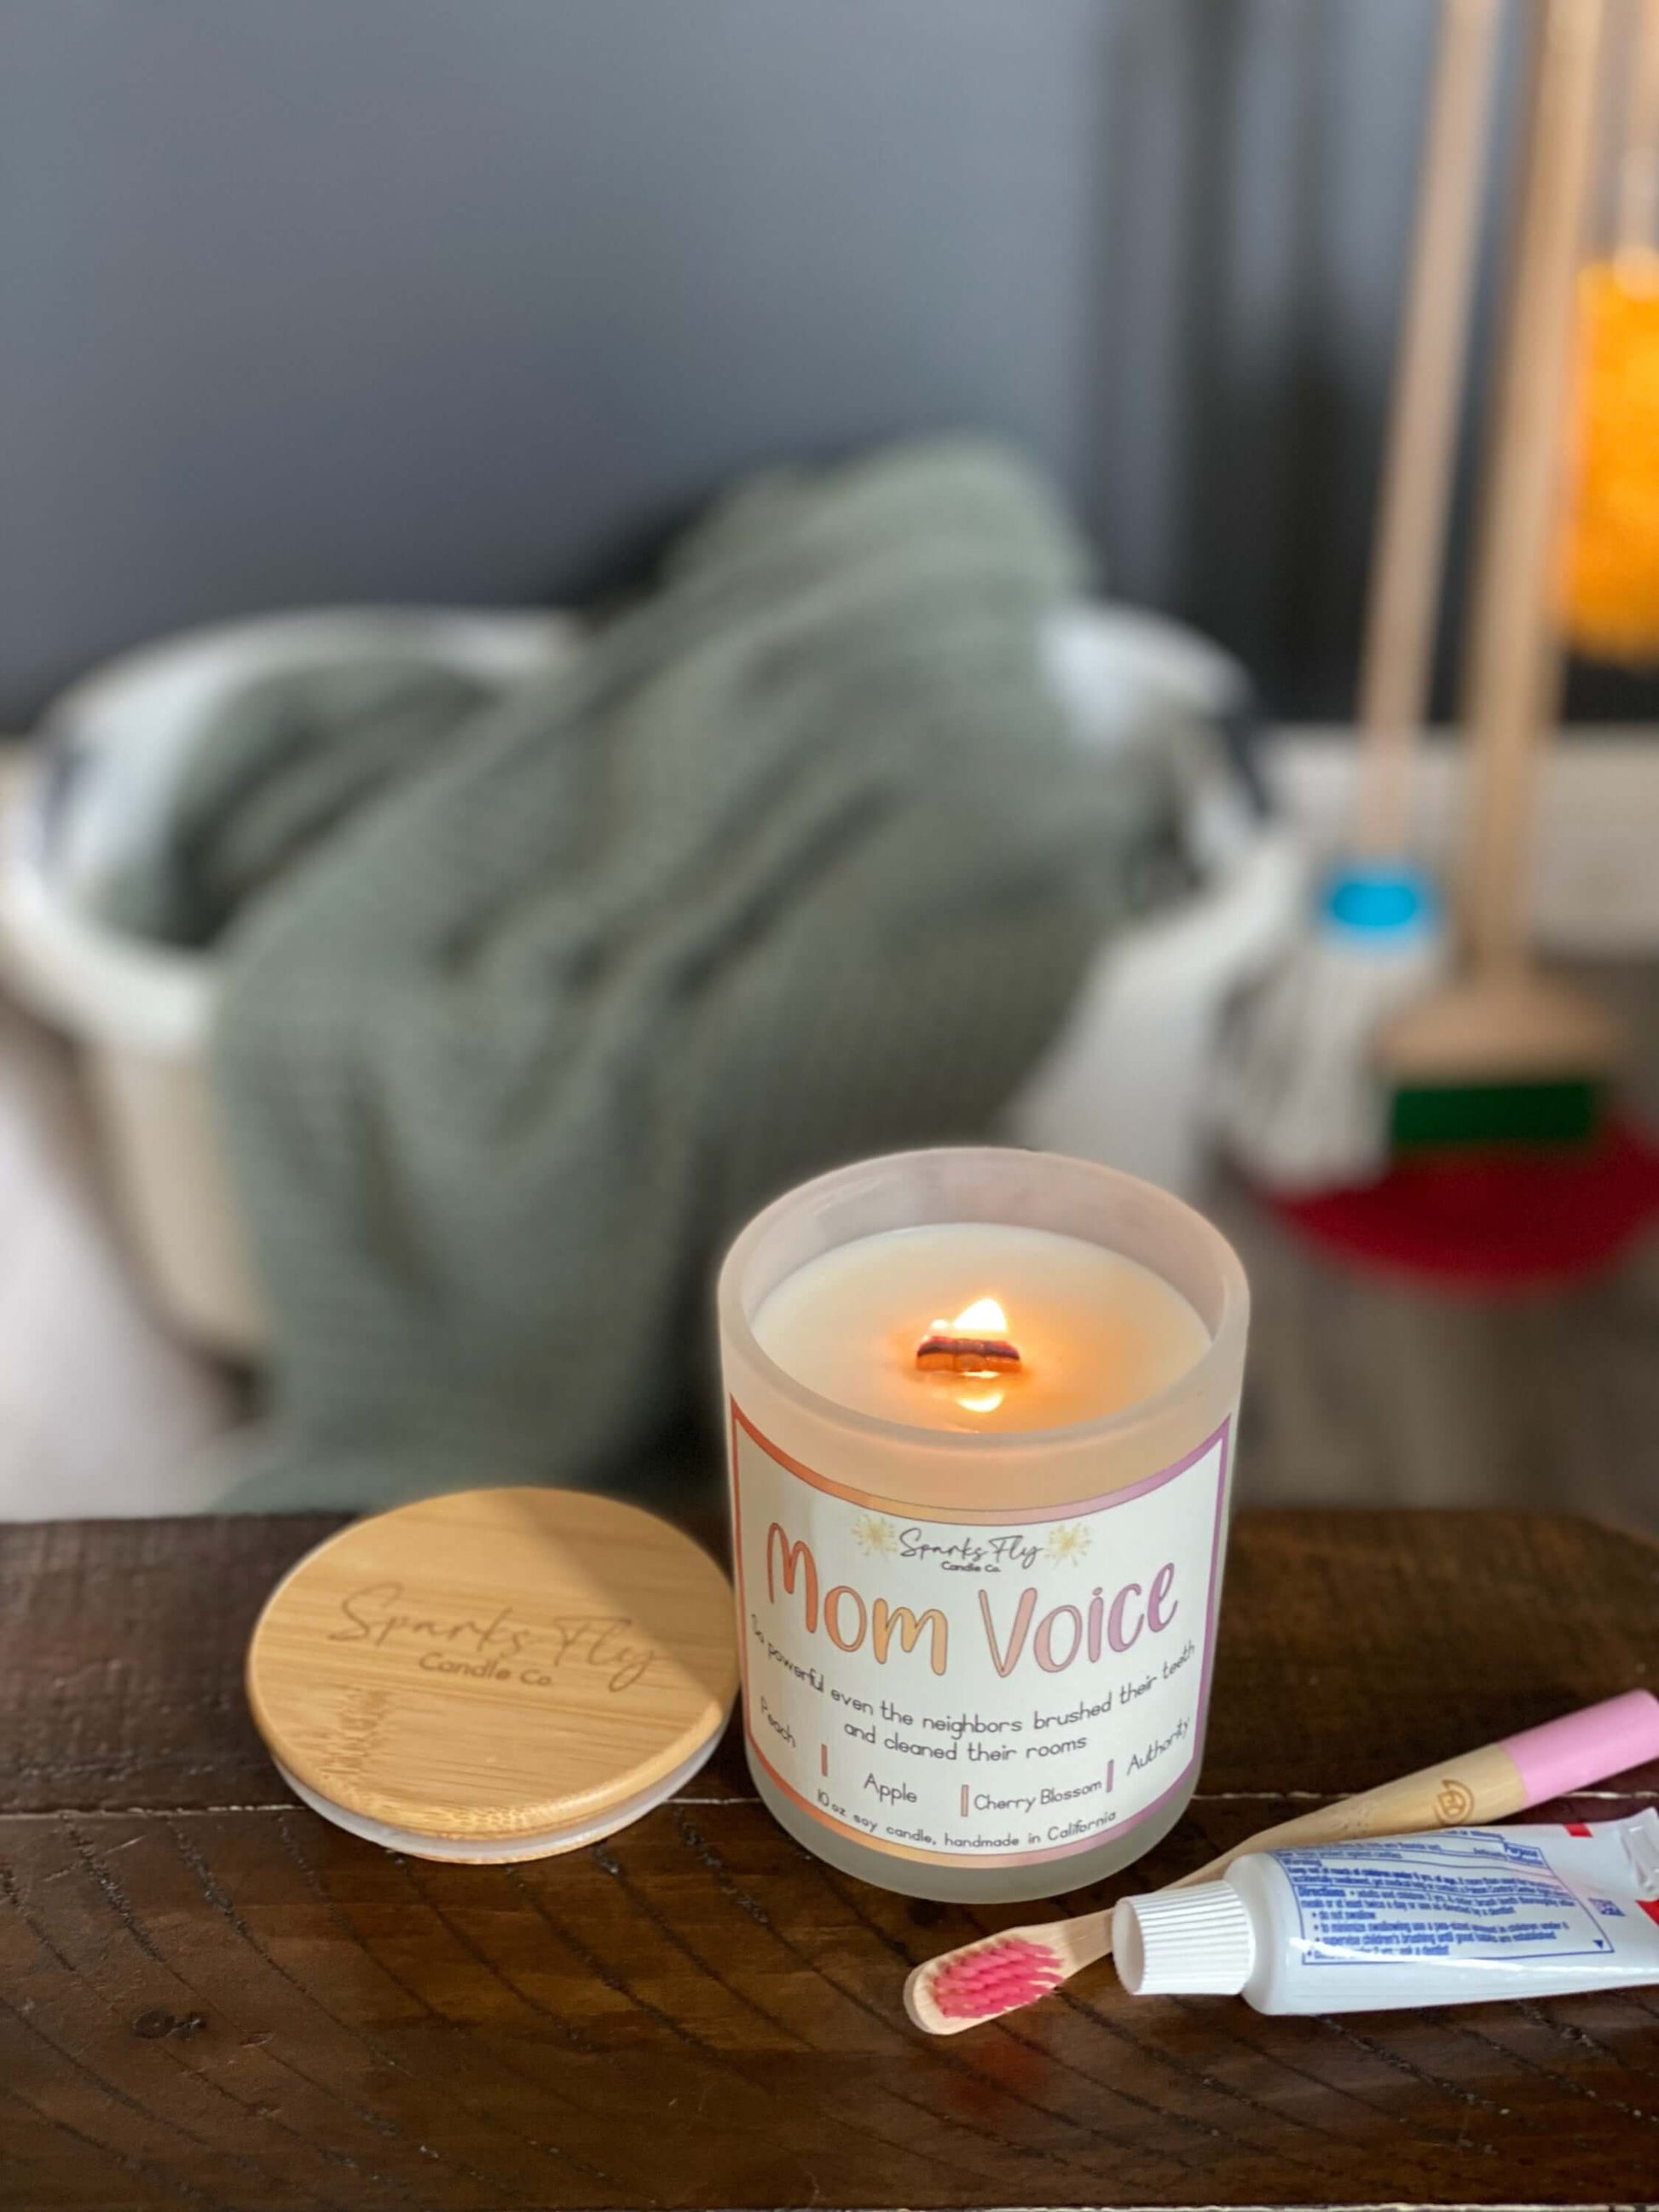 Mom Voice Soy Candle, Crackling Wooden Wick, Essential Oils